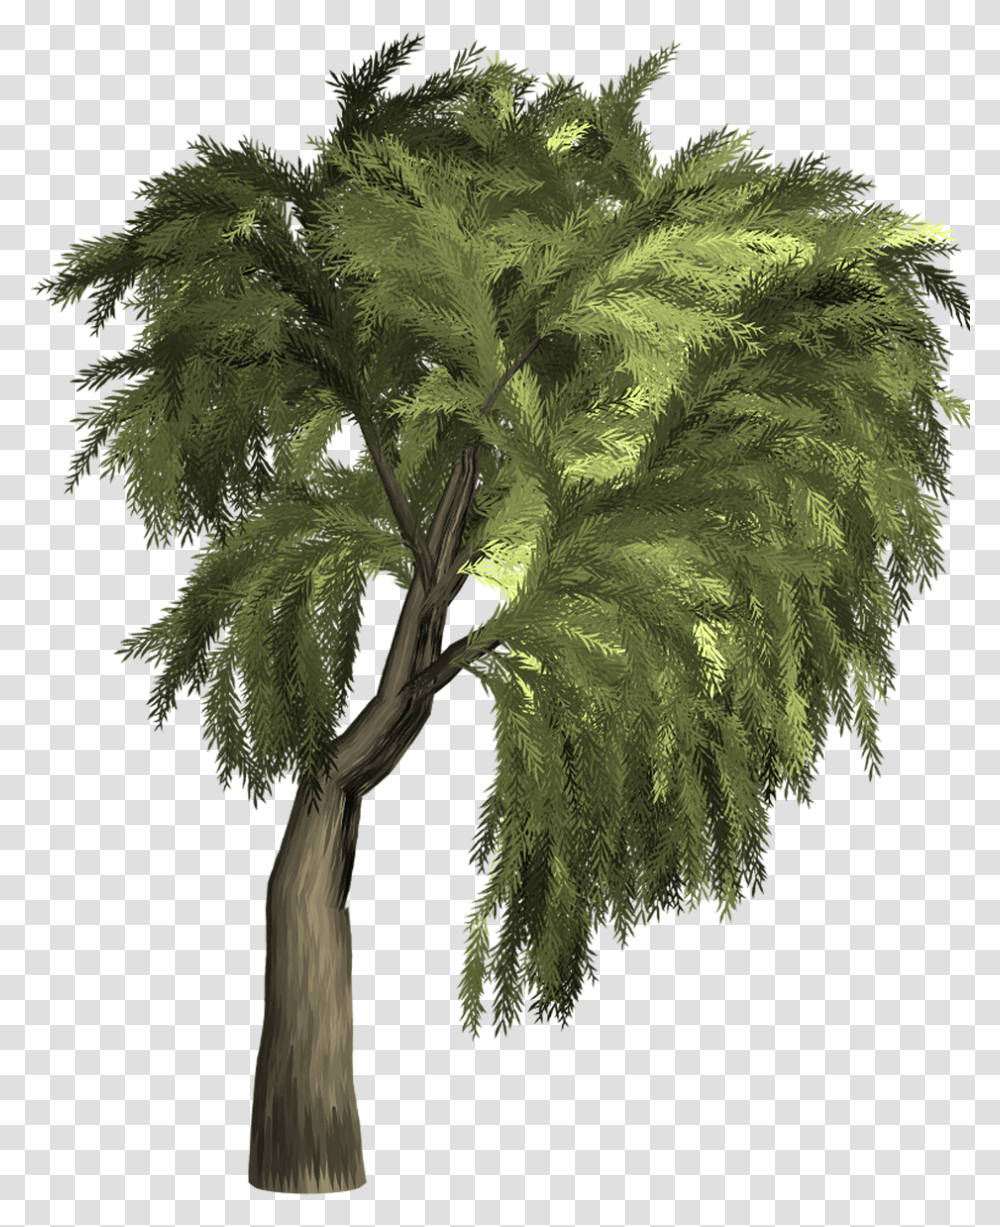 Willow Tree Isolated Free Image On Pixabay Arbre Fond, Plant, Leaf, Palm Tree, Arecaceae Transparent Png